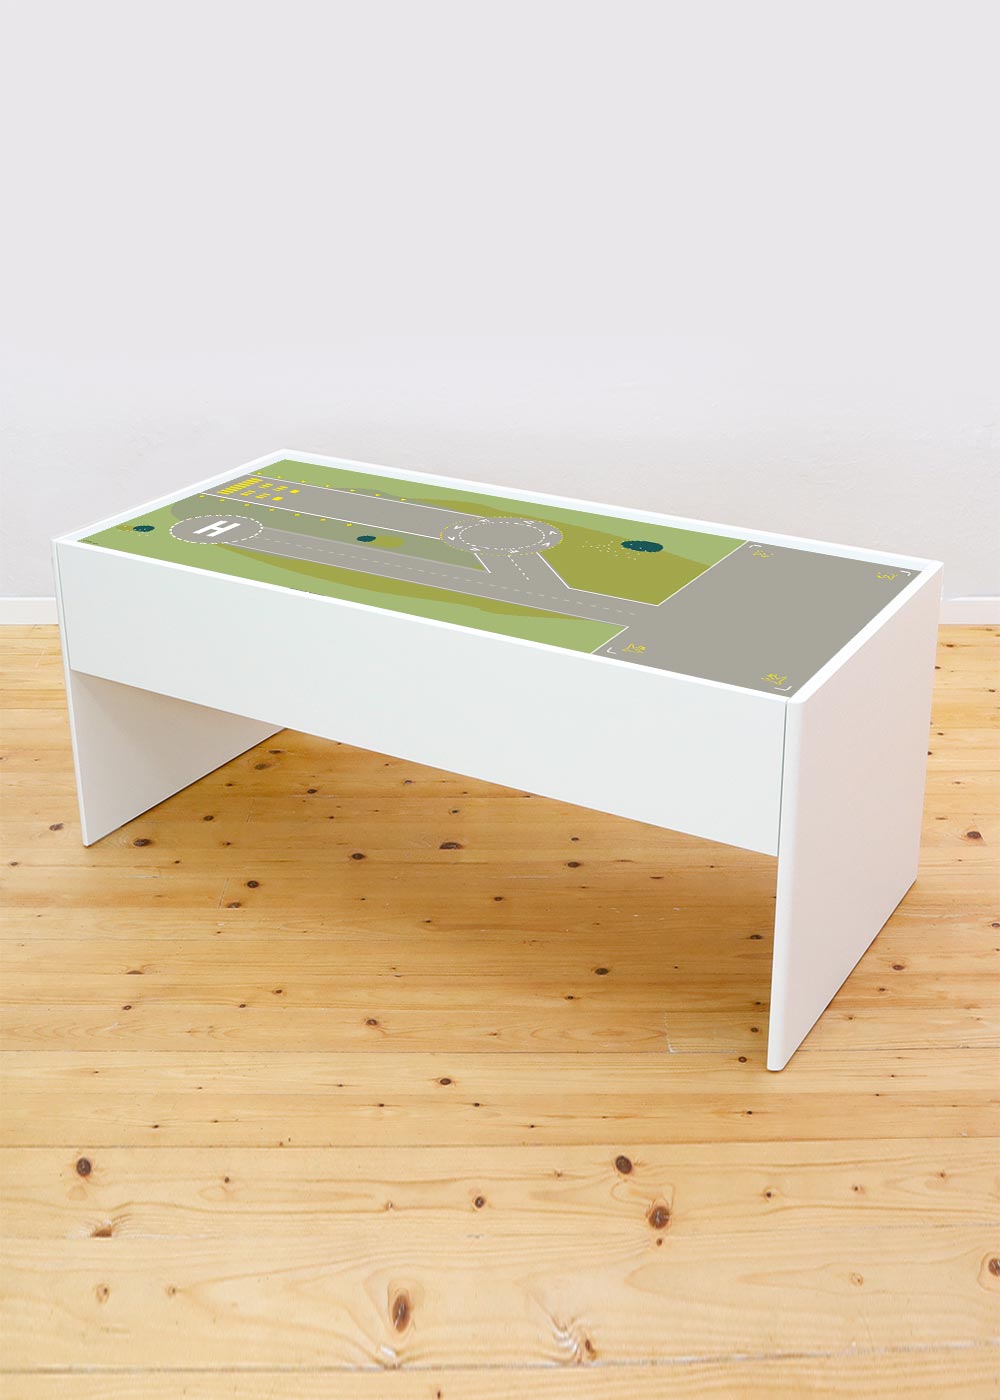 Ikea Dundra Game table Landebahn complete view